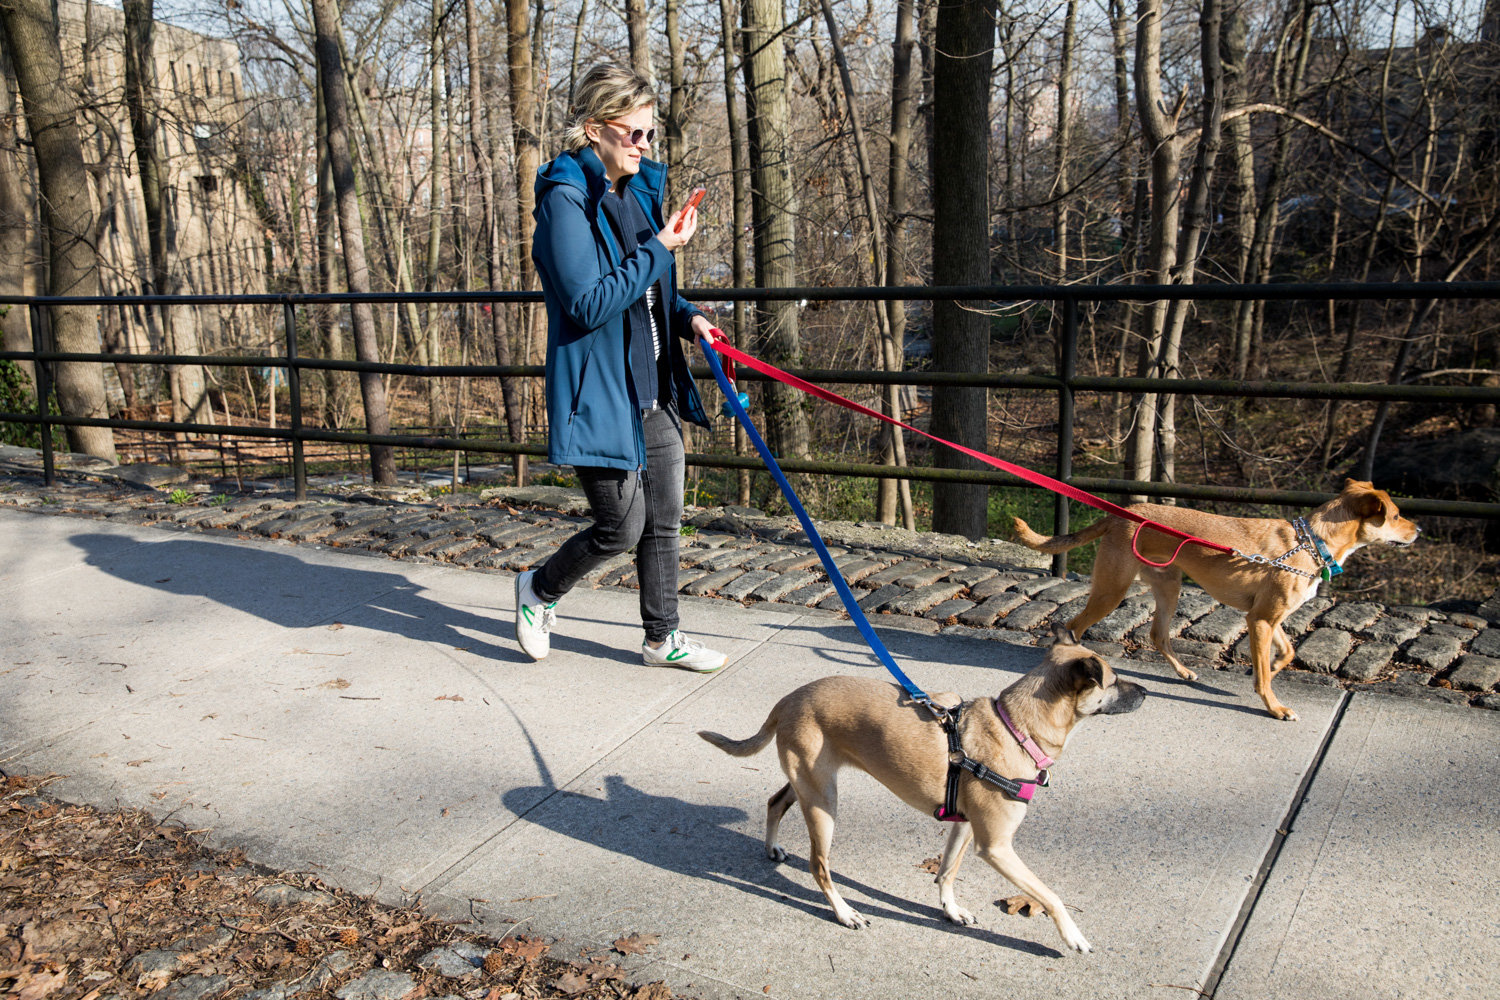 Kingsbridge Heights Community Center executive director Margaret Della walks her dogs along Manhattan College Parkway, which she livestreamed to several of her colleagues as a way to boost morale after the organization moved to working from home in light of the coronavirus pandemic.